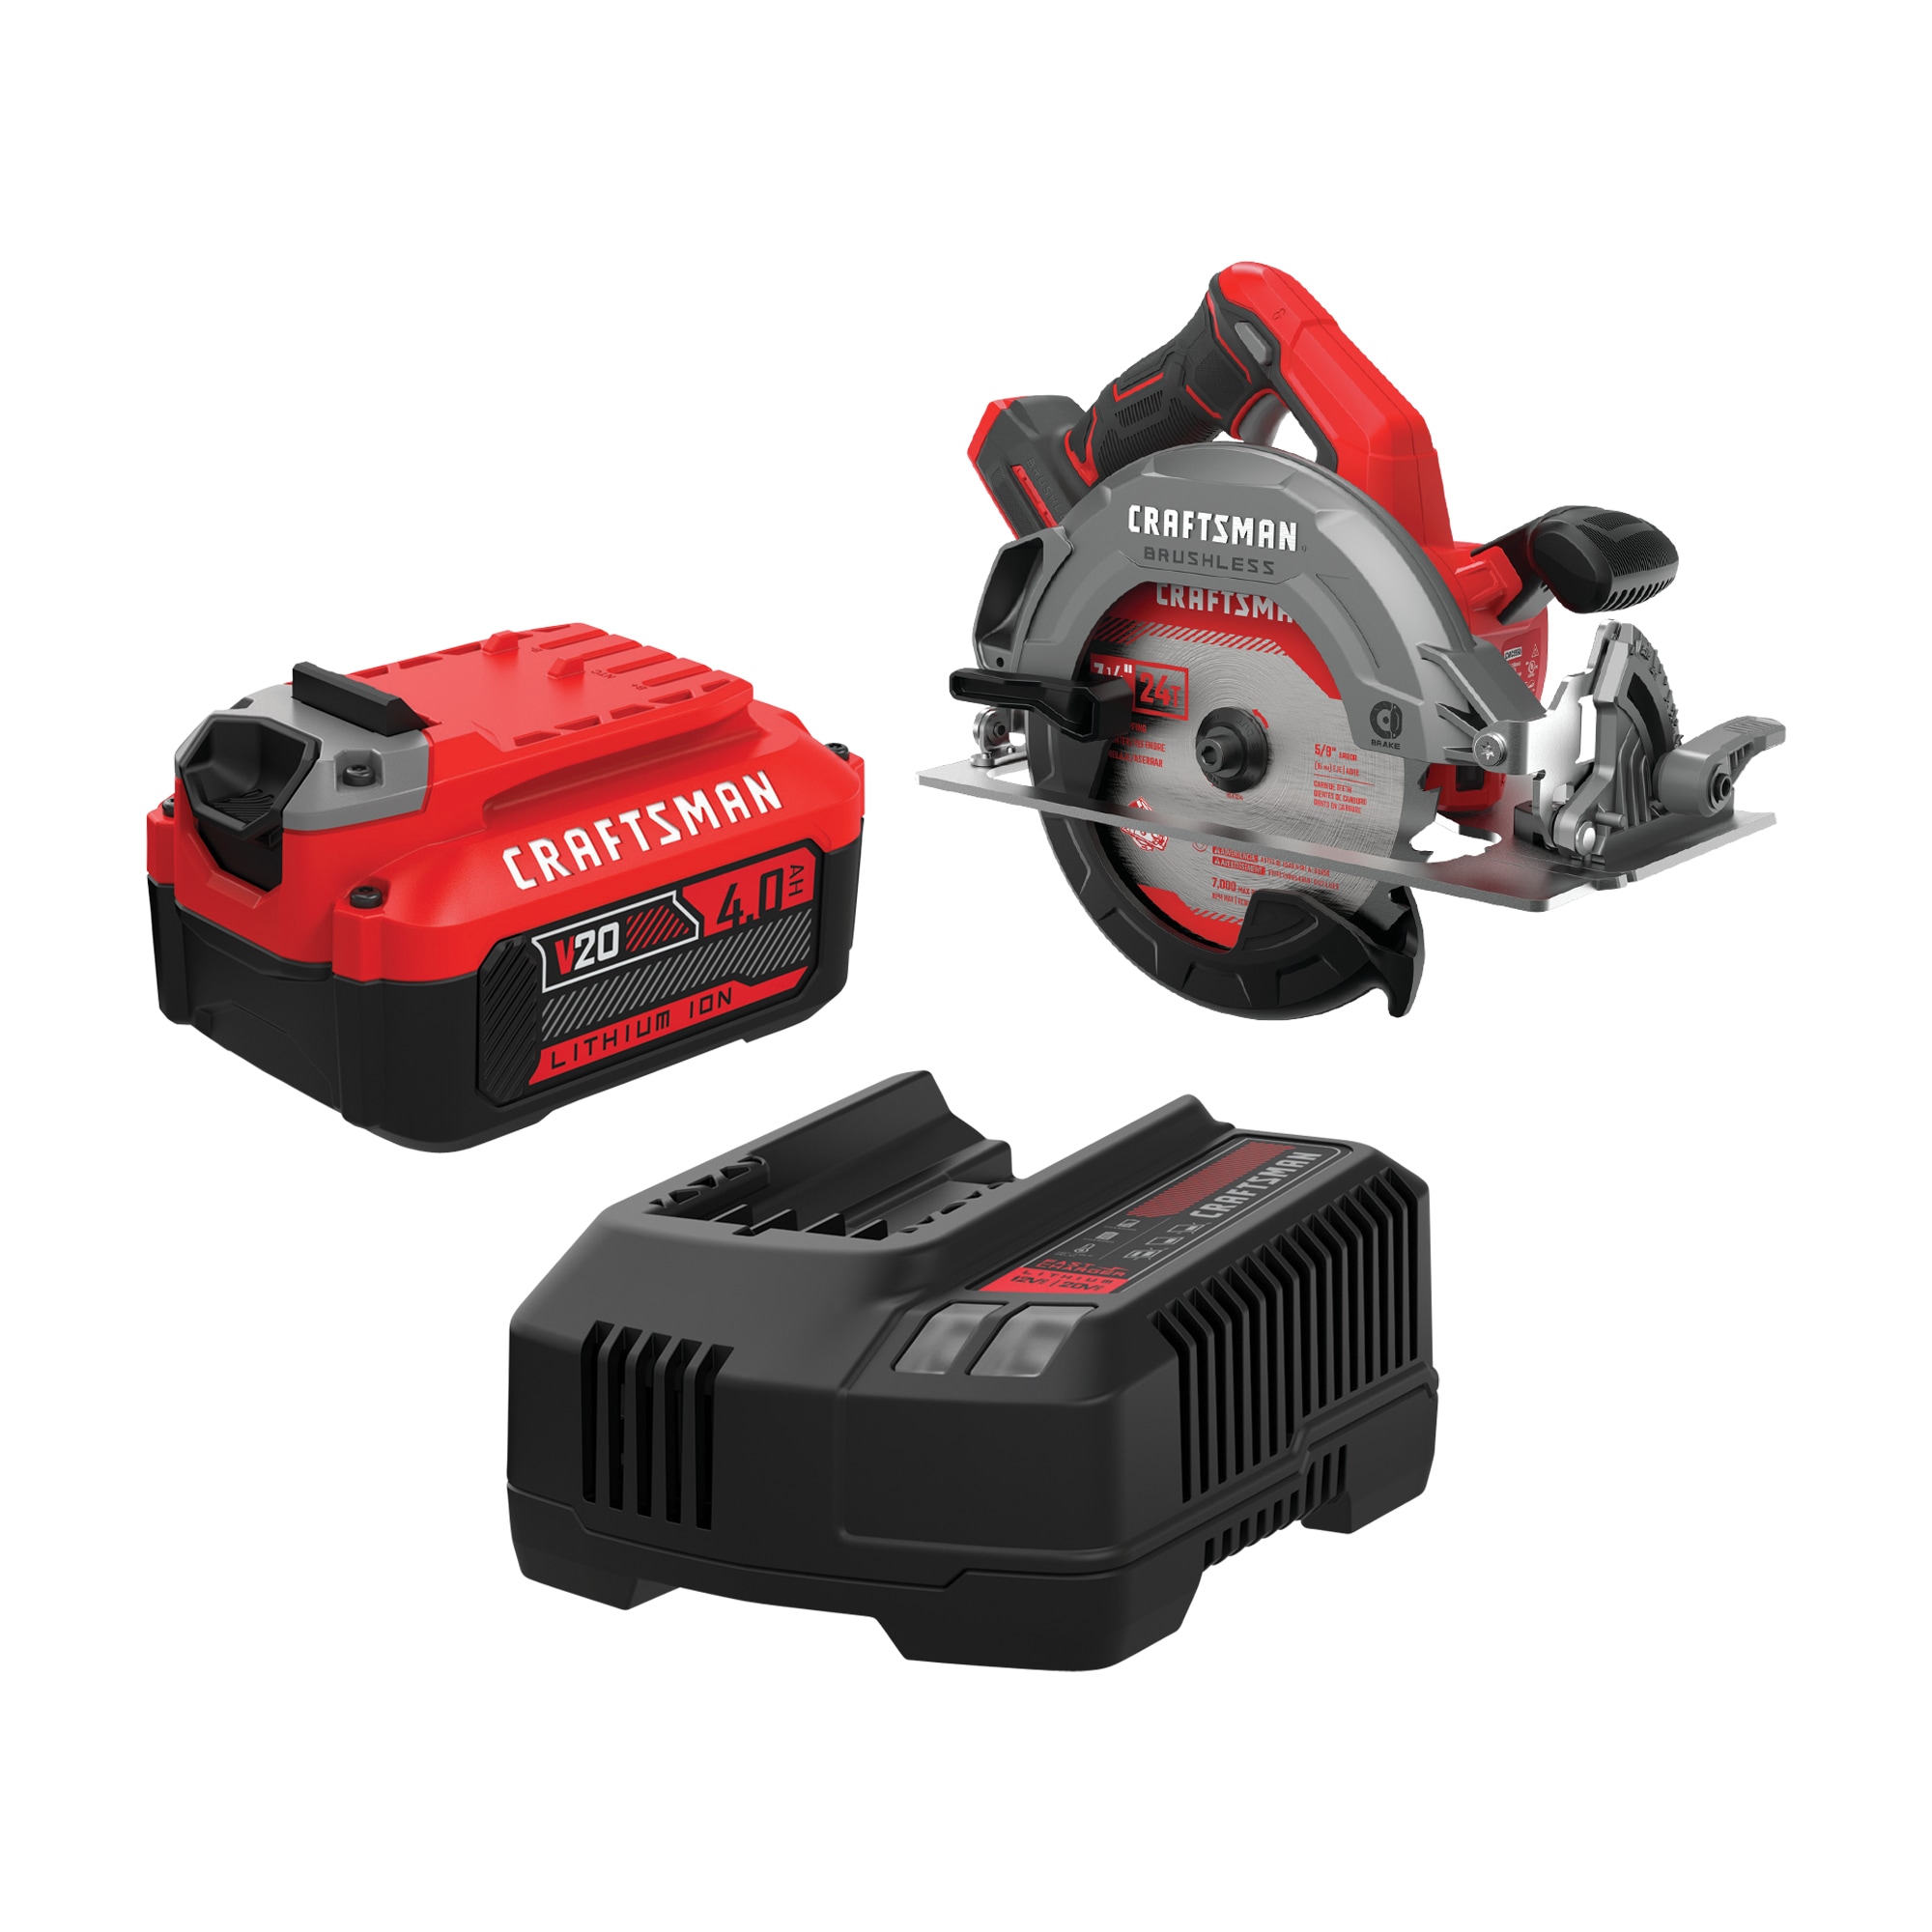 PowerSmart 20V 6-1/2 Inch Cordless Circular Saw with 4.0Ah Battery